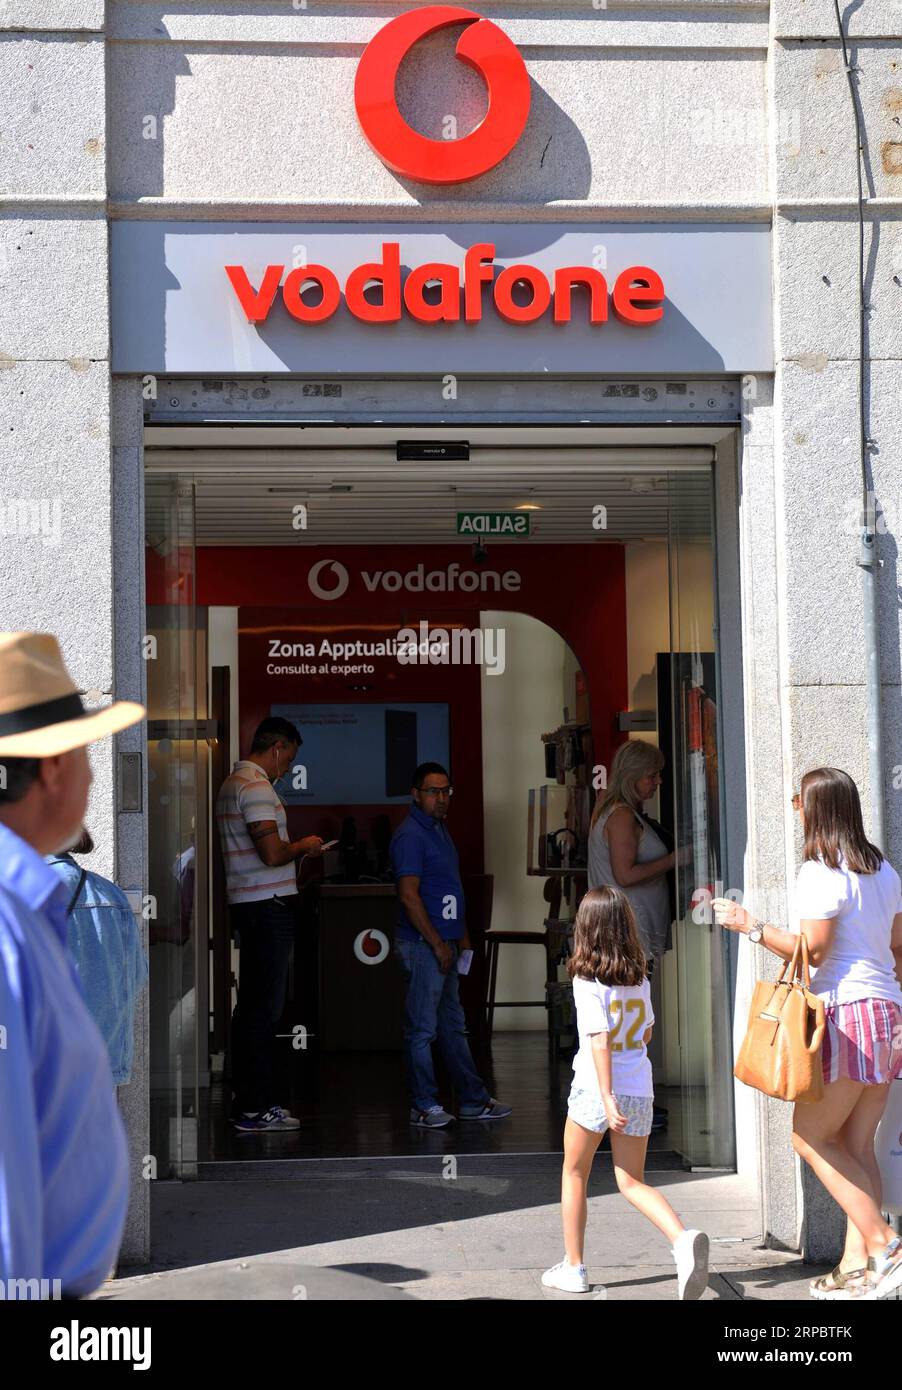 (190615) -- MADRID, June 15, 2019 (Xinhua) -- Photo taken on June 15, 2019 shows a store of Vodafone Espana in Madrid, Spain. In cooperation with Chinese telecom giant Huawei, Vodafone Espana on Saturday rolled out the first commercial 5G mobile services in Spain, making it one of the first European countries with the ultrafast mobile network in Europe. (Xinhua/Guo Qiuda) SPAIN-MADRID-VODAFONE-HUAWEI-FIRST 5G NETWORK PUBLICATIONxNOTxINxCHN Stock Photo